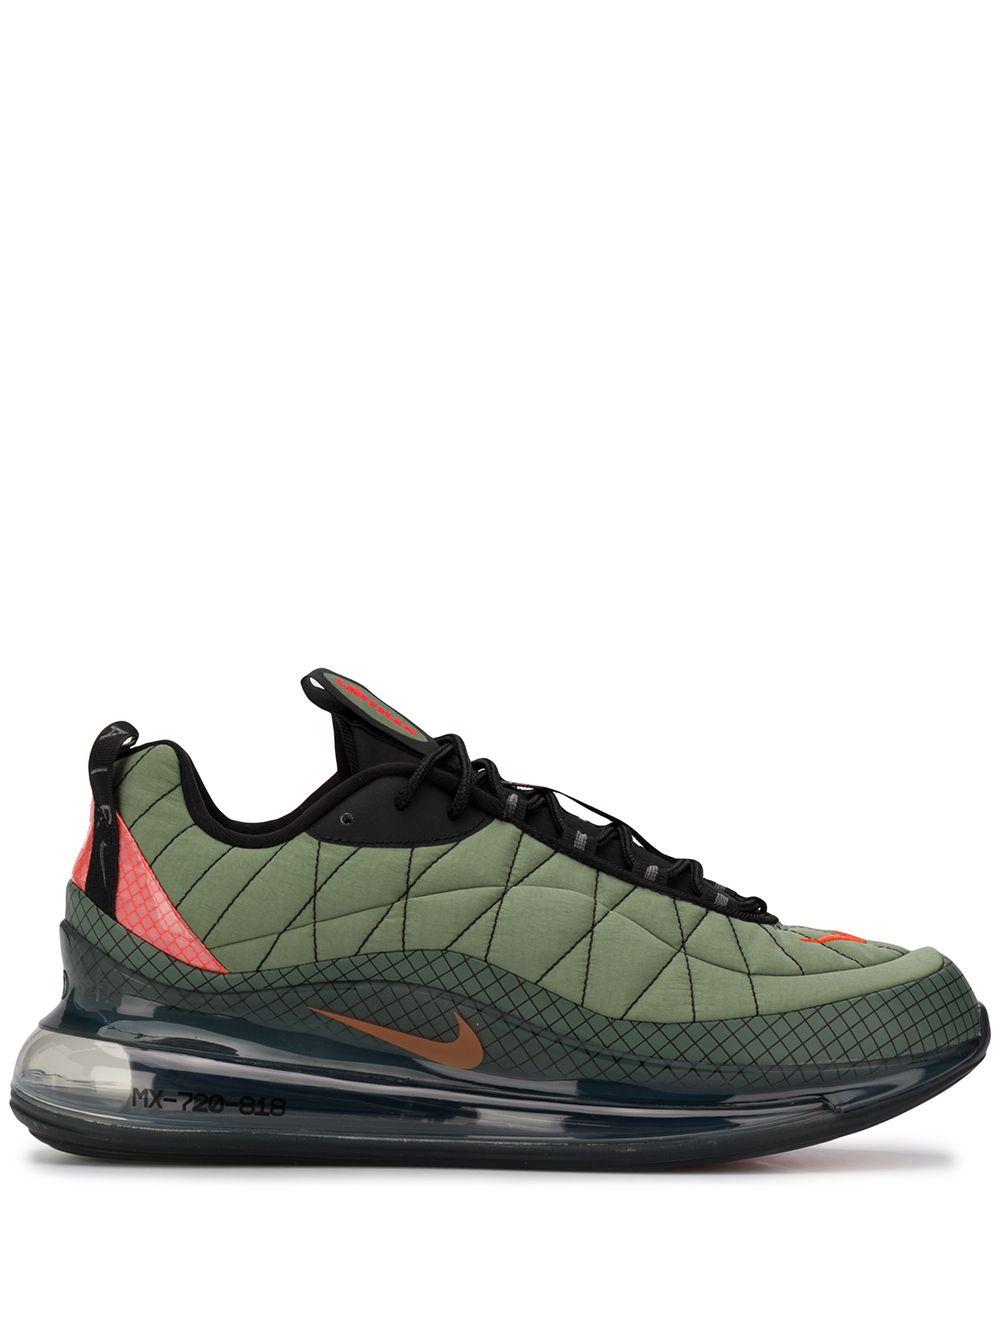 Nike Air Mx 720 818 Trainers in Green for Men | Lyst